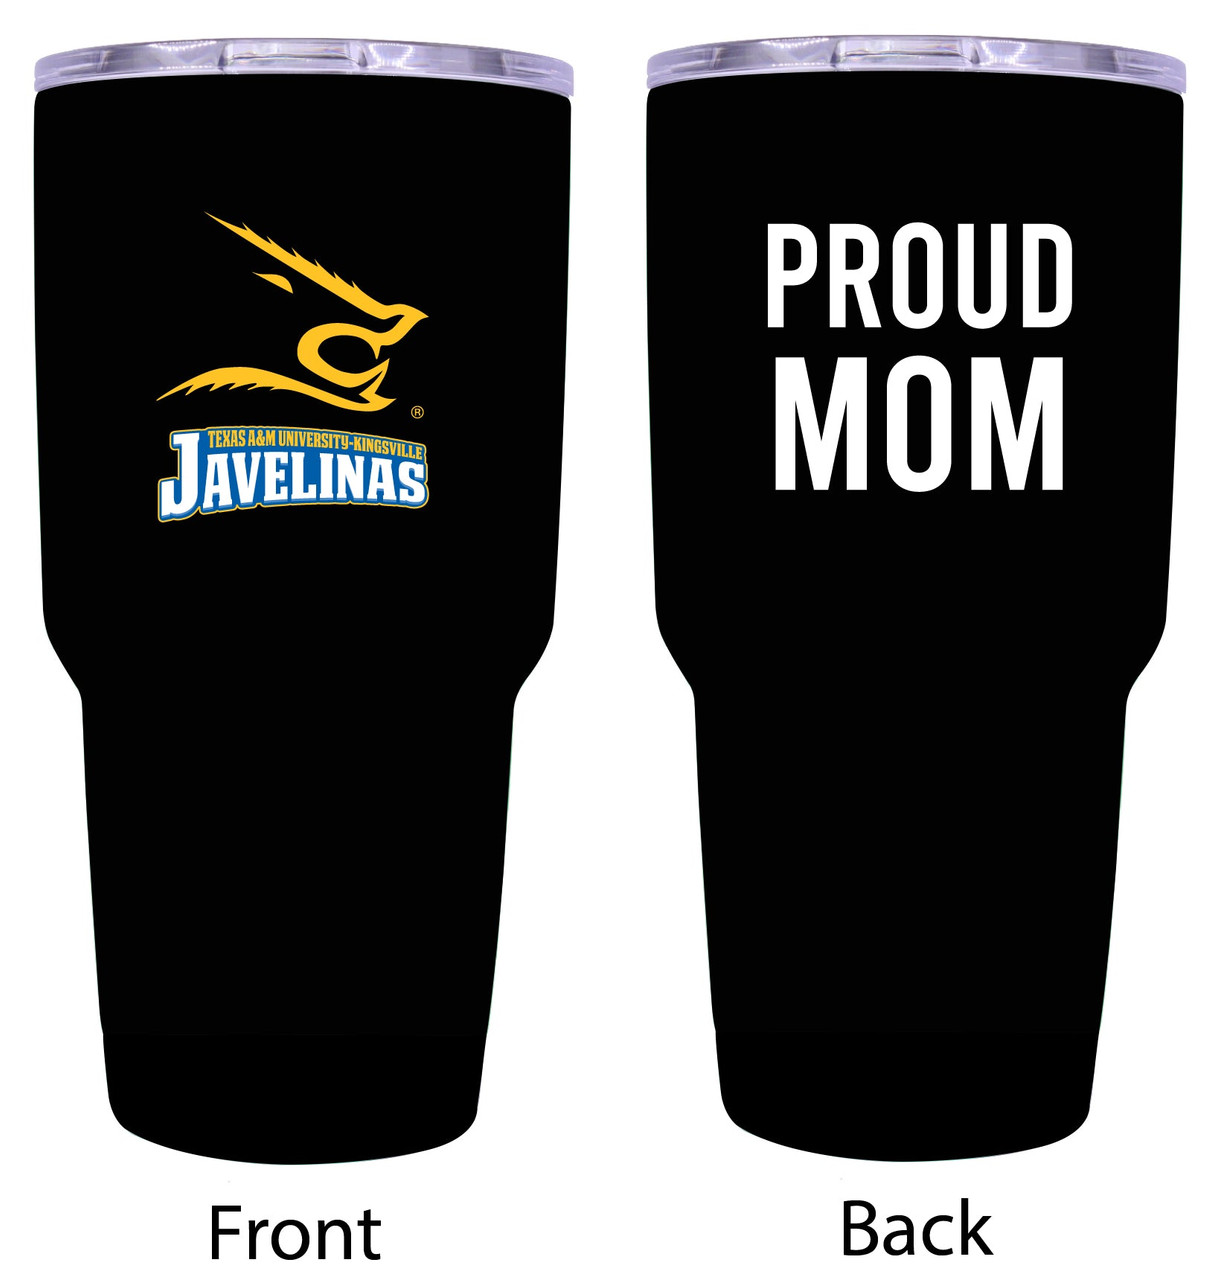 Texas A&M Kingsville Javelinas Proud Mom 24 oz Insulated Stainless Steel Tumblers Choose Your Color.